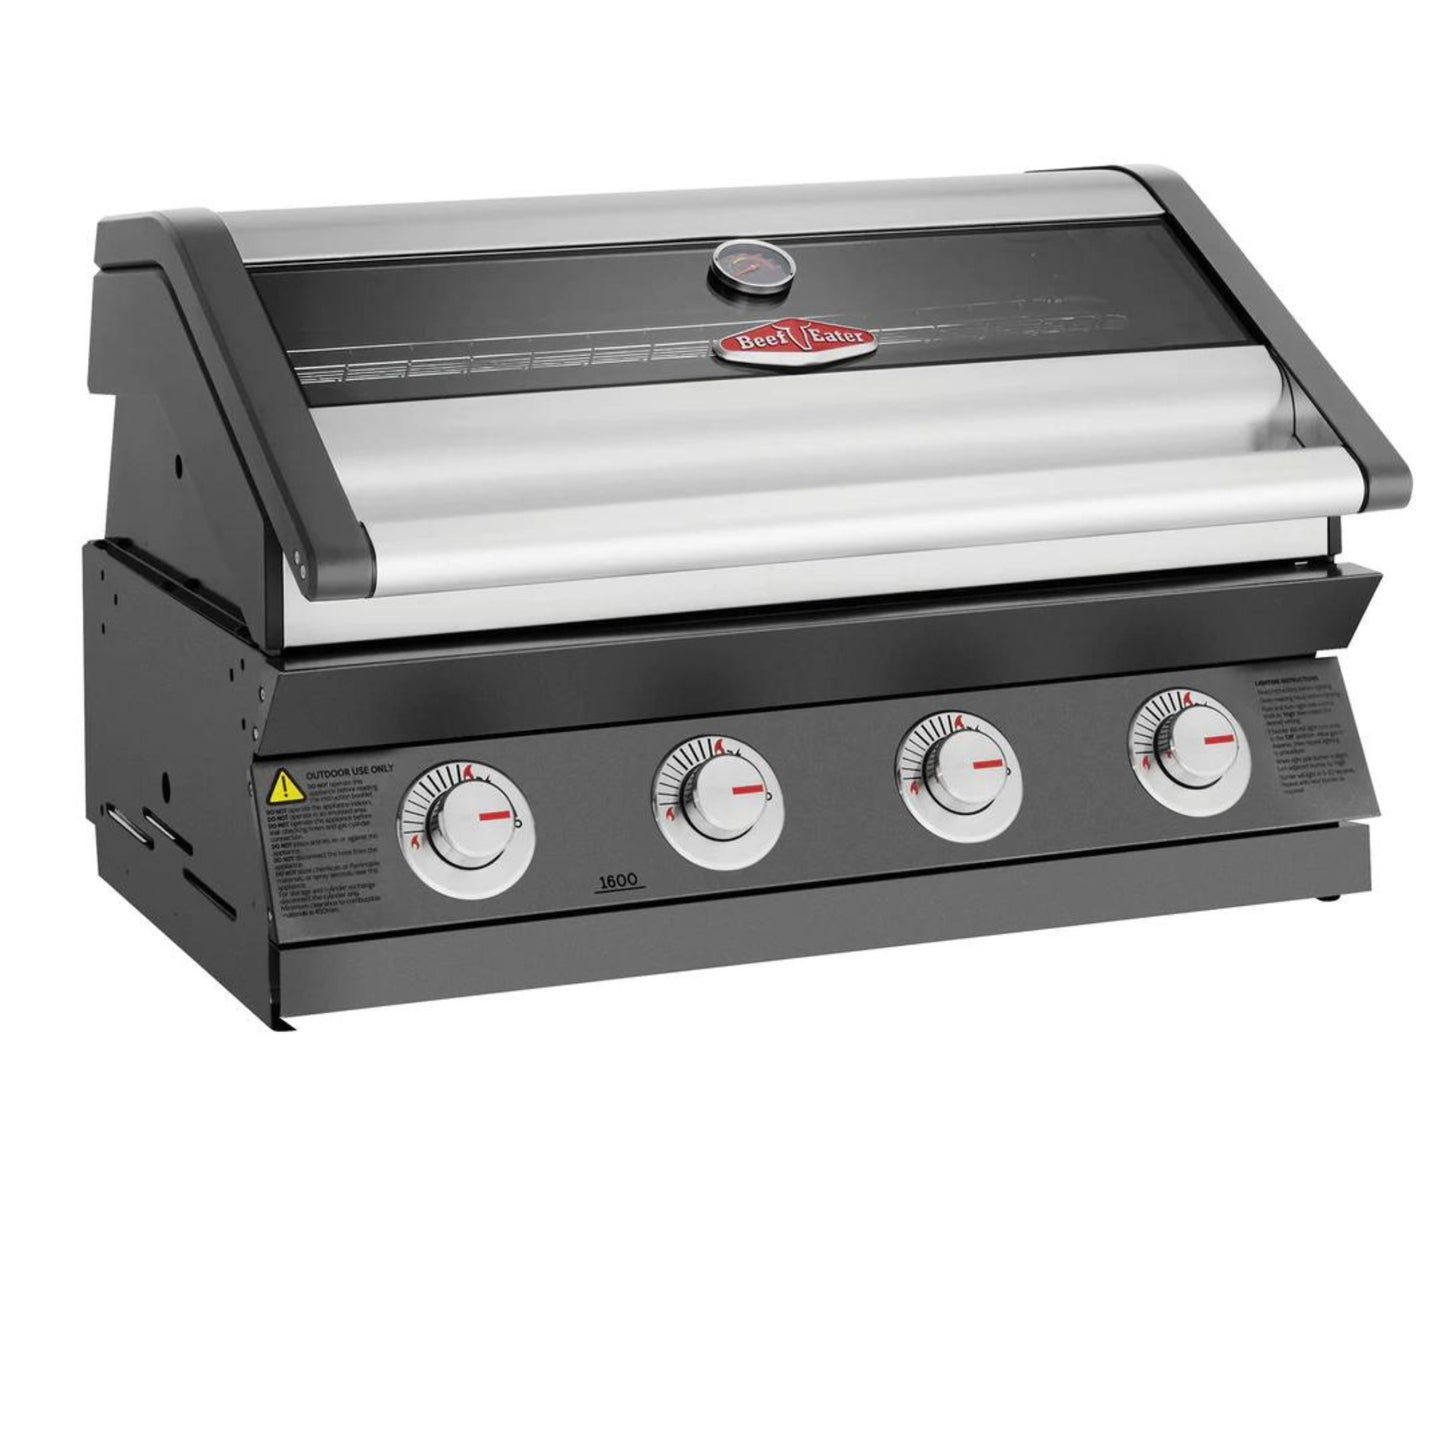 Cabinex Classic with BeefEater 4 Burner 1600E BBQ with fridge